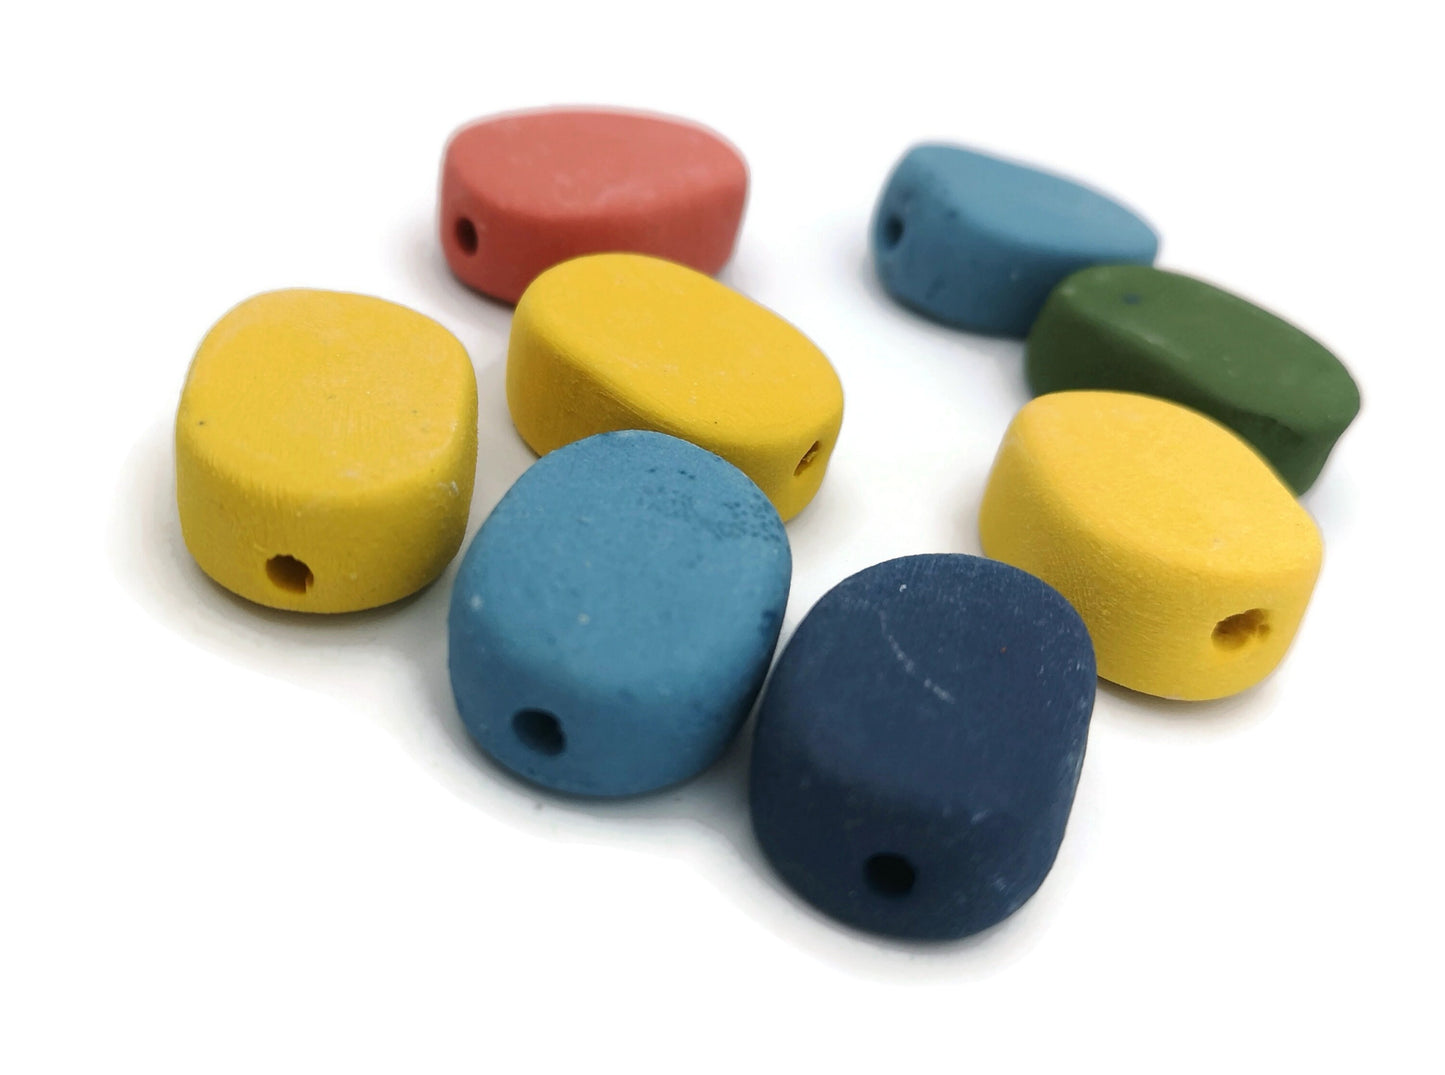 8Pc Etra Large Handmade Ceramic Beads For Jewelry Making, 2 mm Hole Assorted Matte Oval Shaped Beads For Macrame, Colorful Clay Beads - Ceramica Ana Rafael